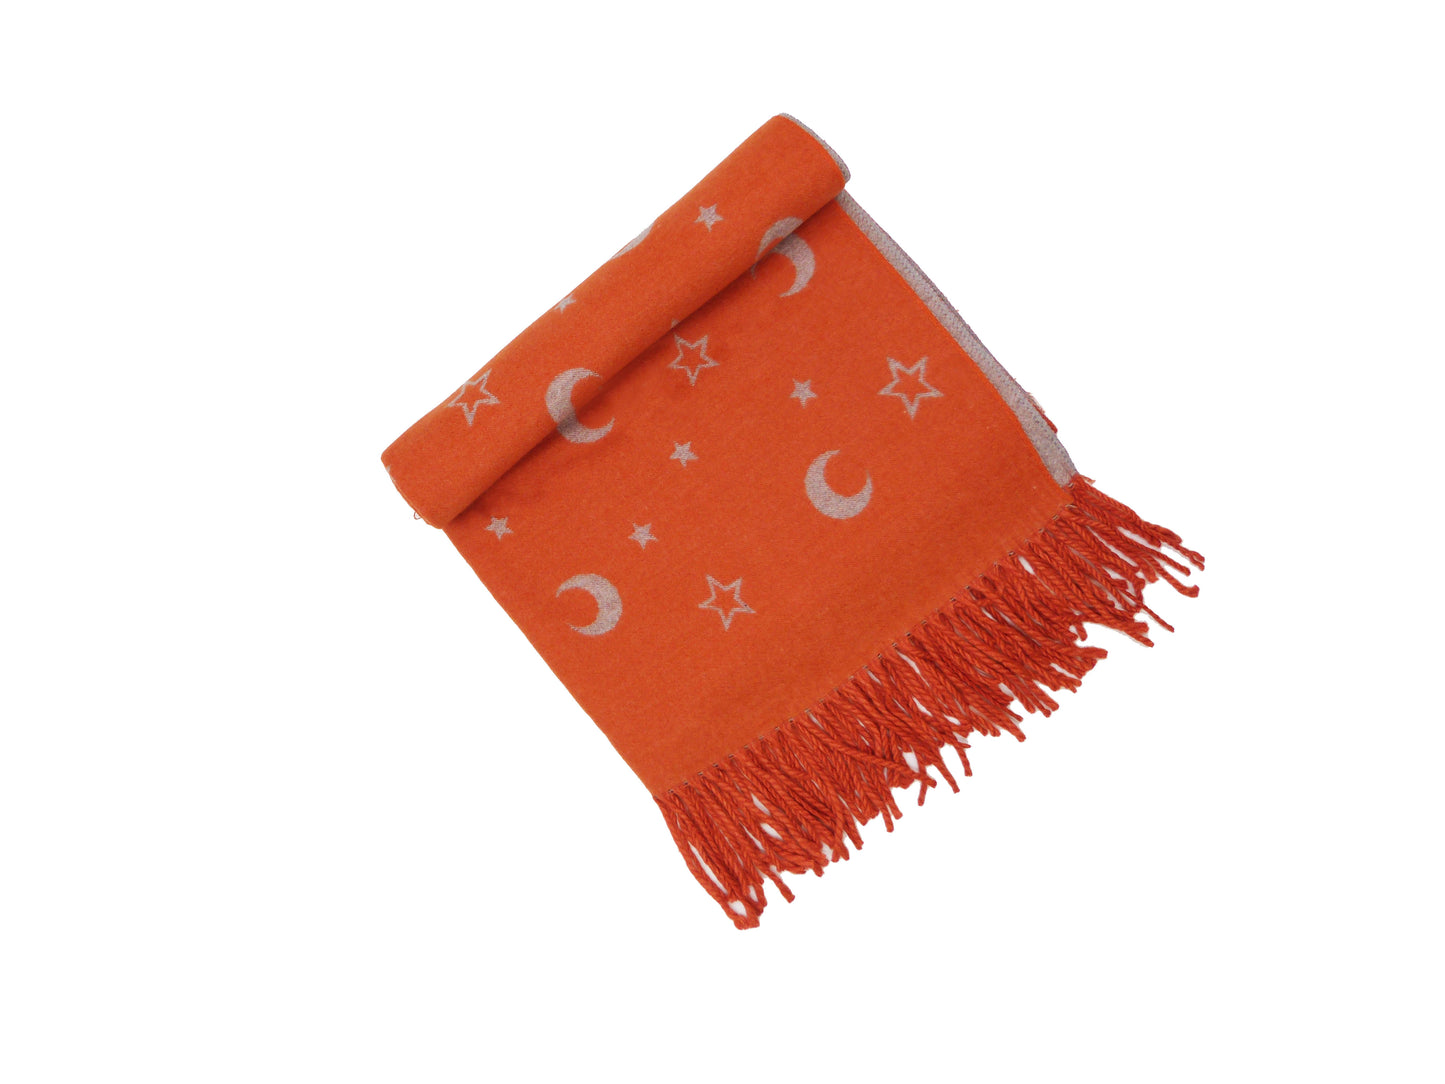 Moon And star Cashmere Print Reversible Pashmina Wrap Scarf With Gift Box